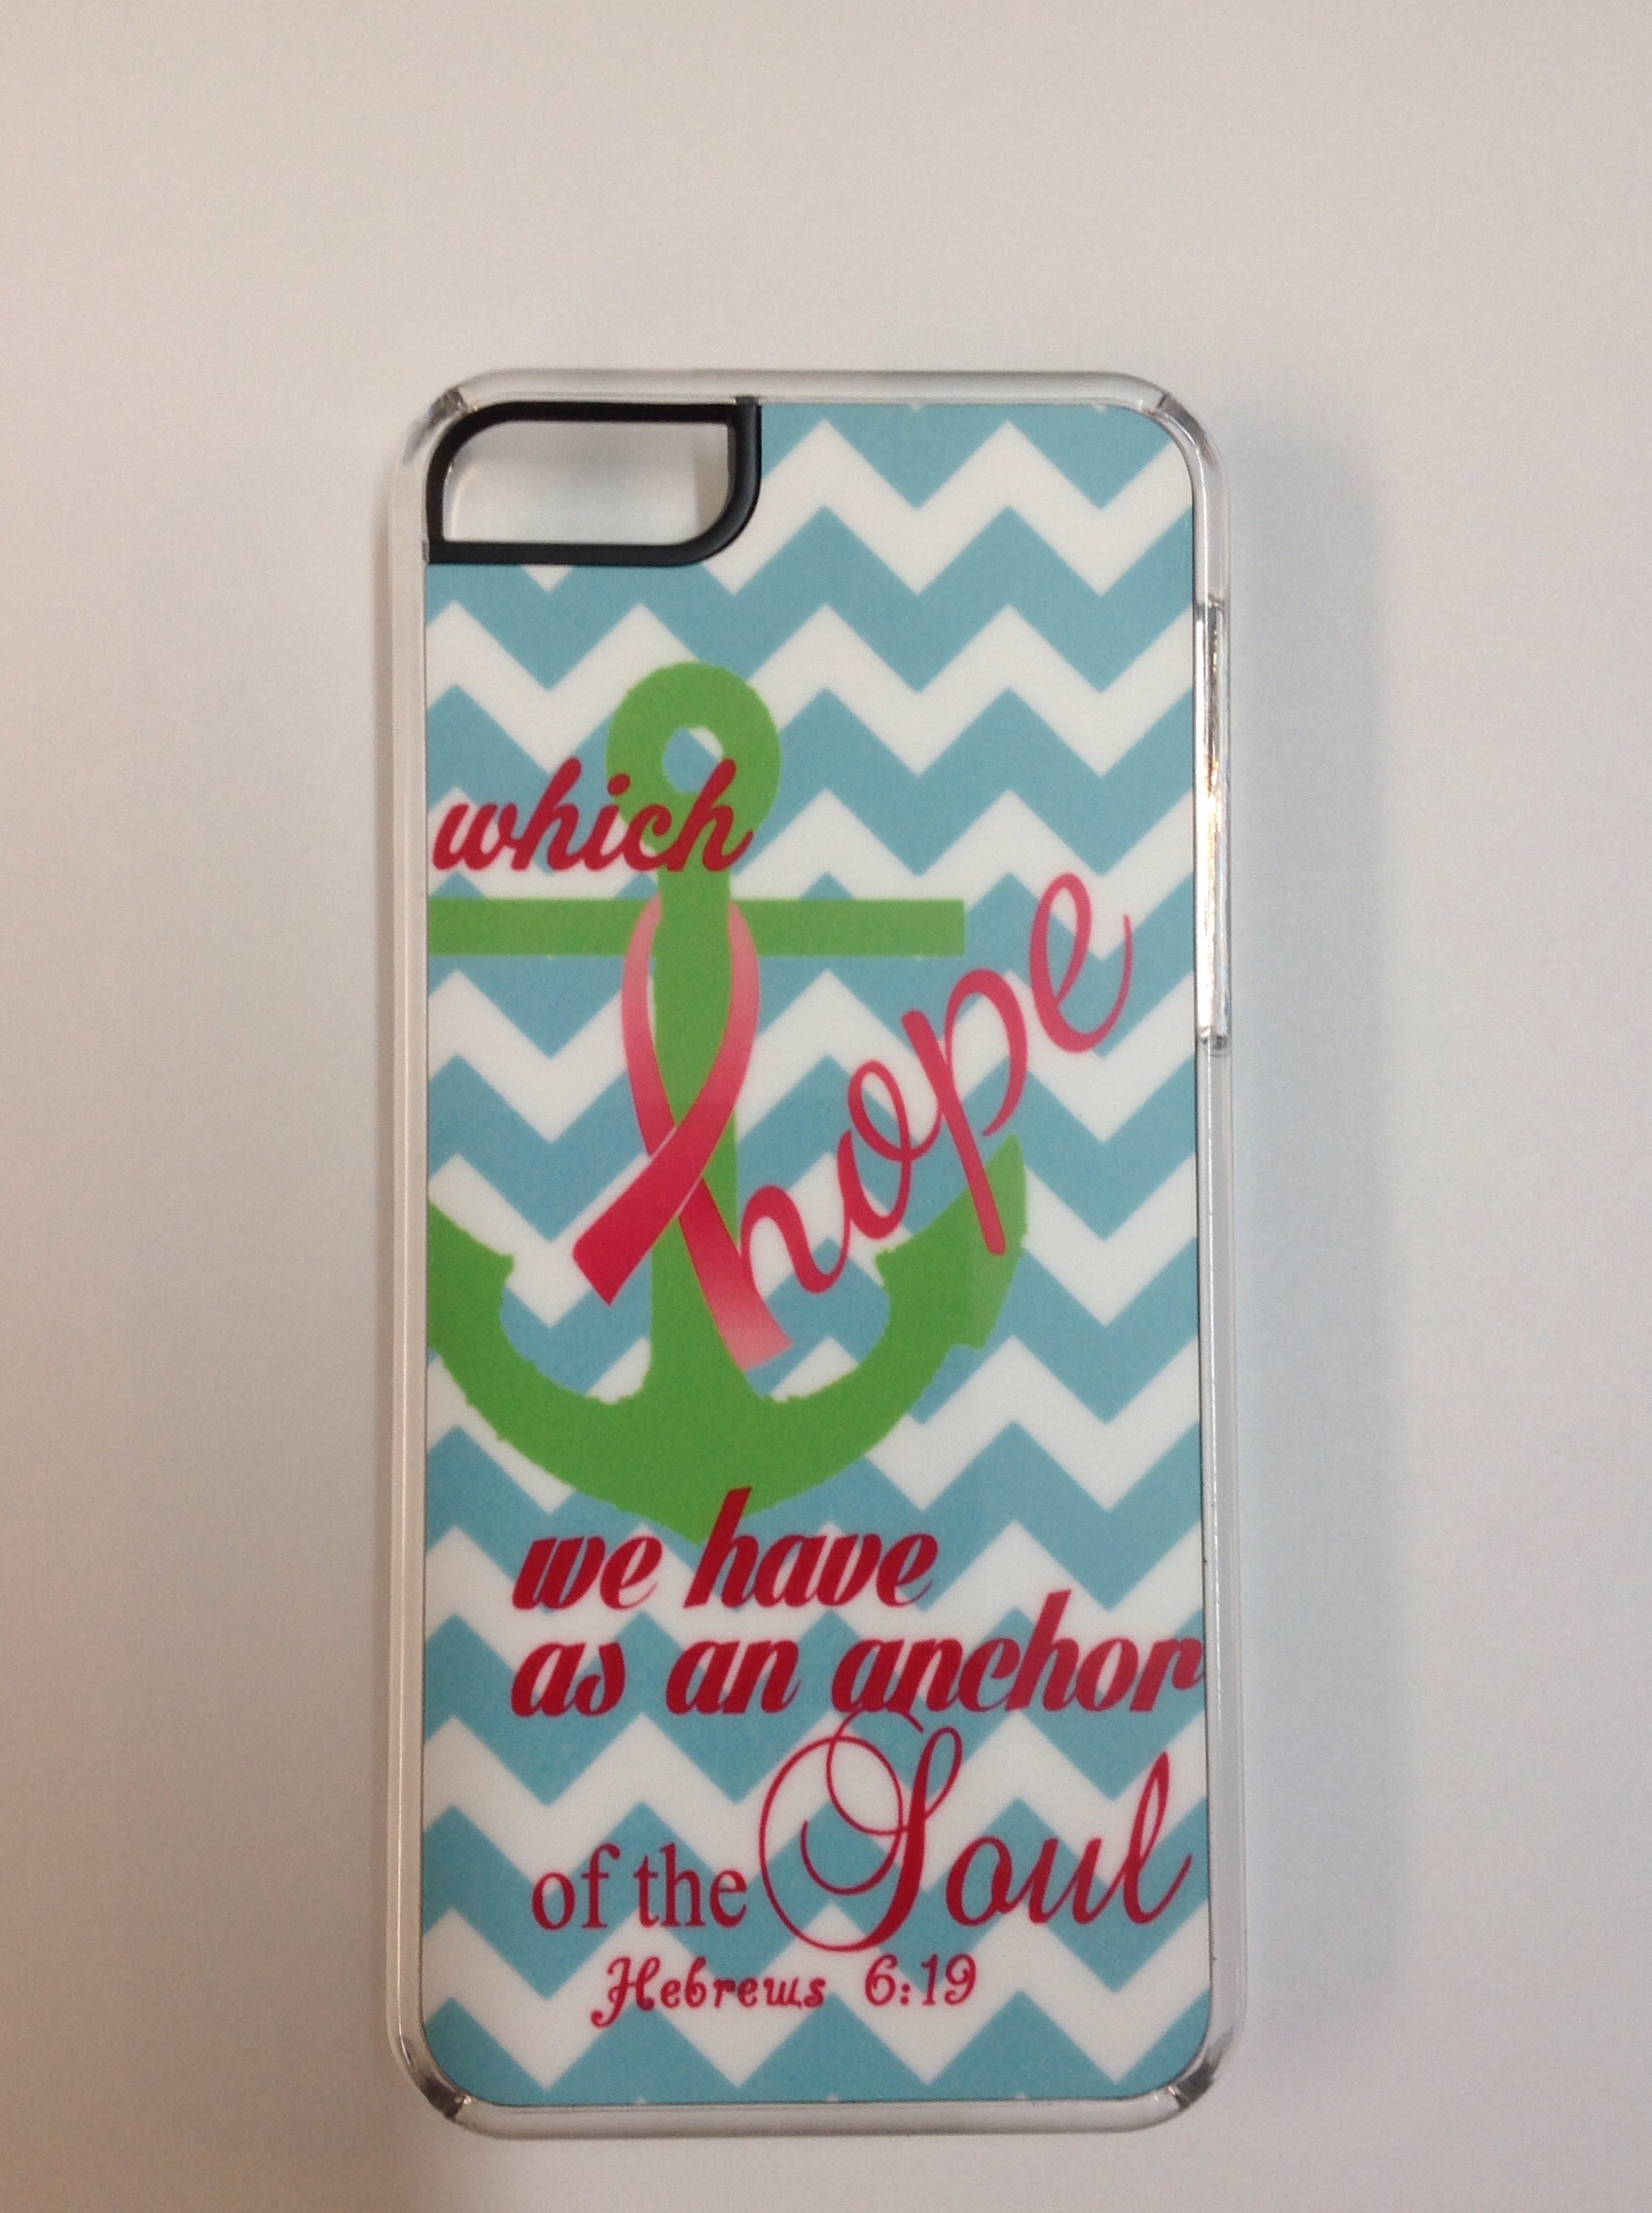 Hope Cancer Awareness made with sublimation printing